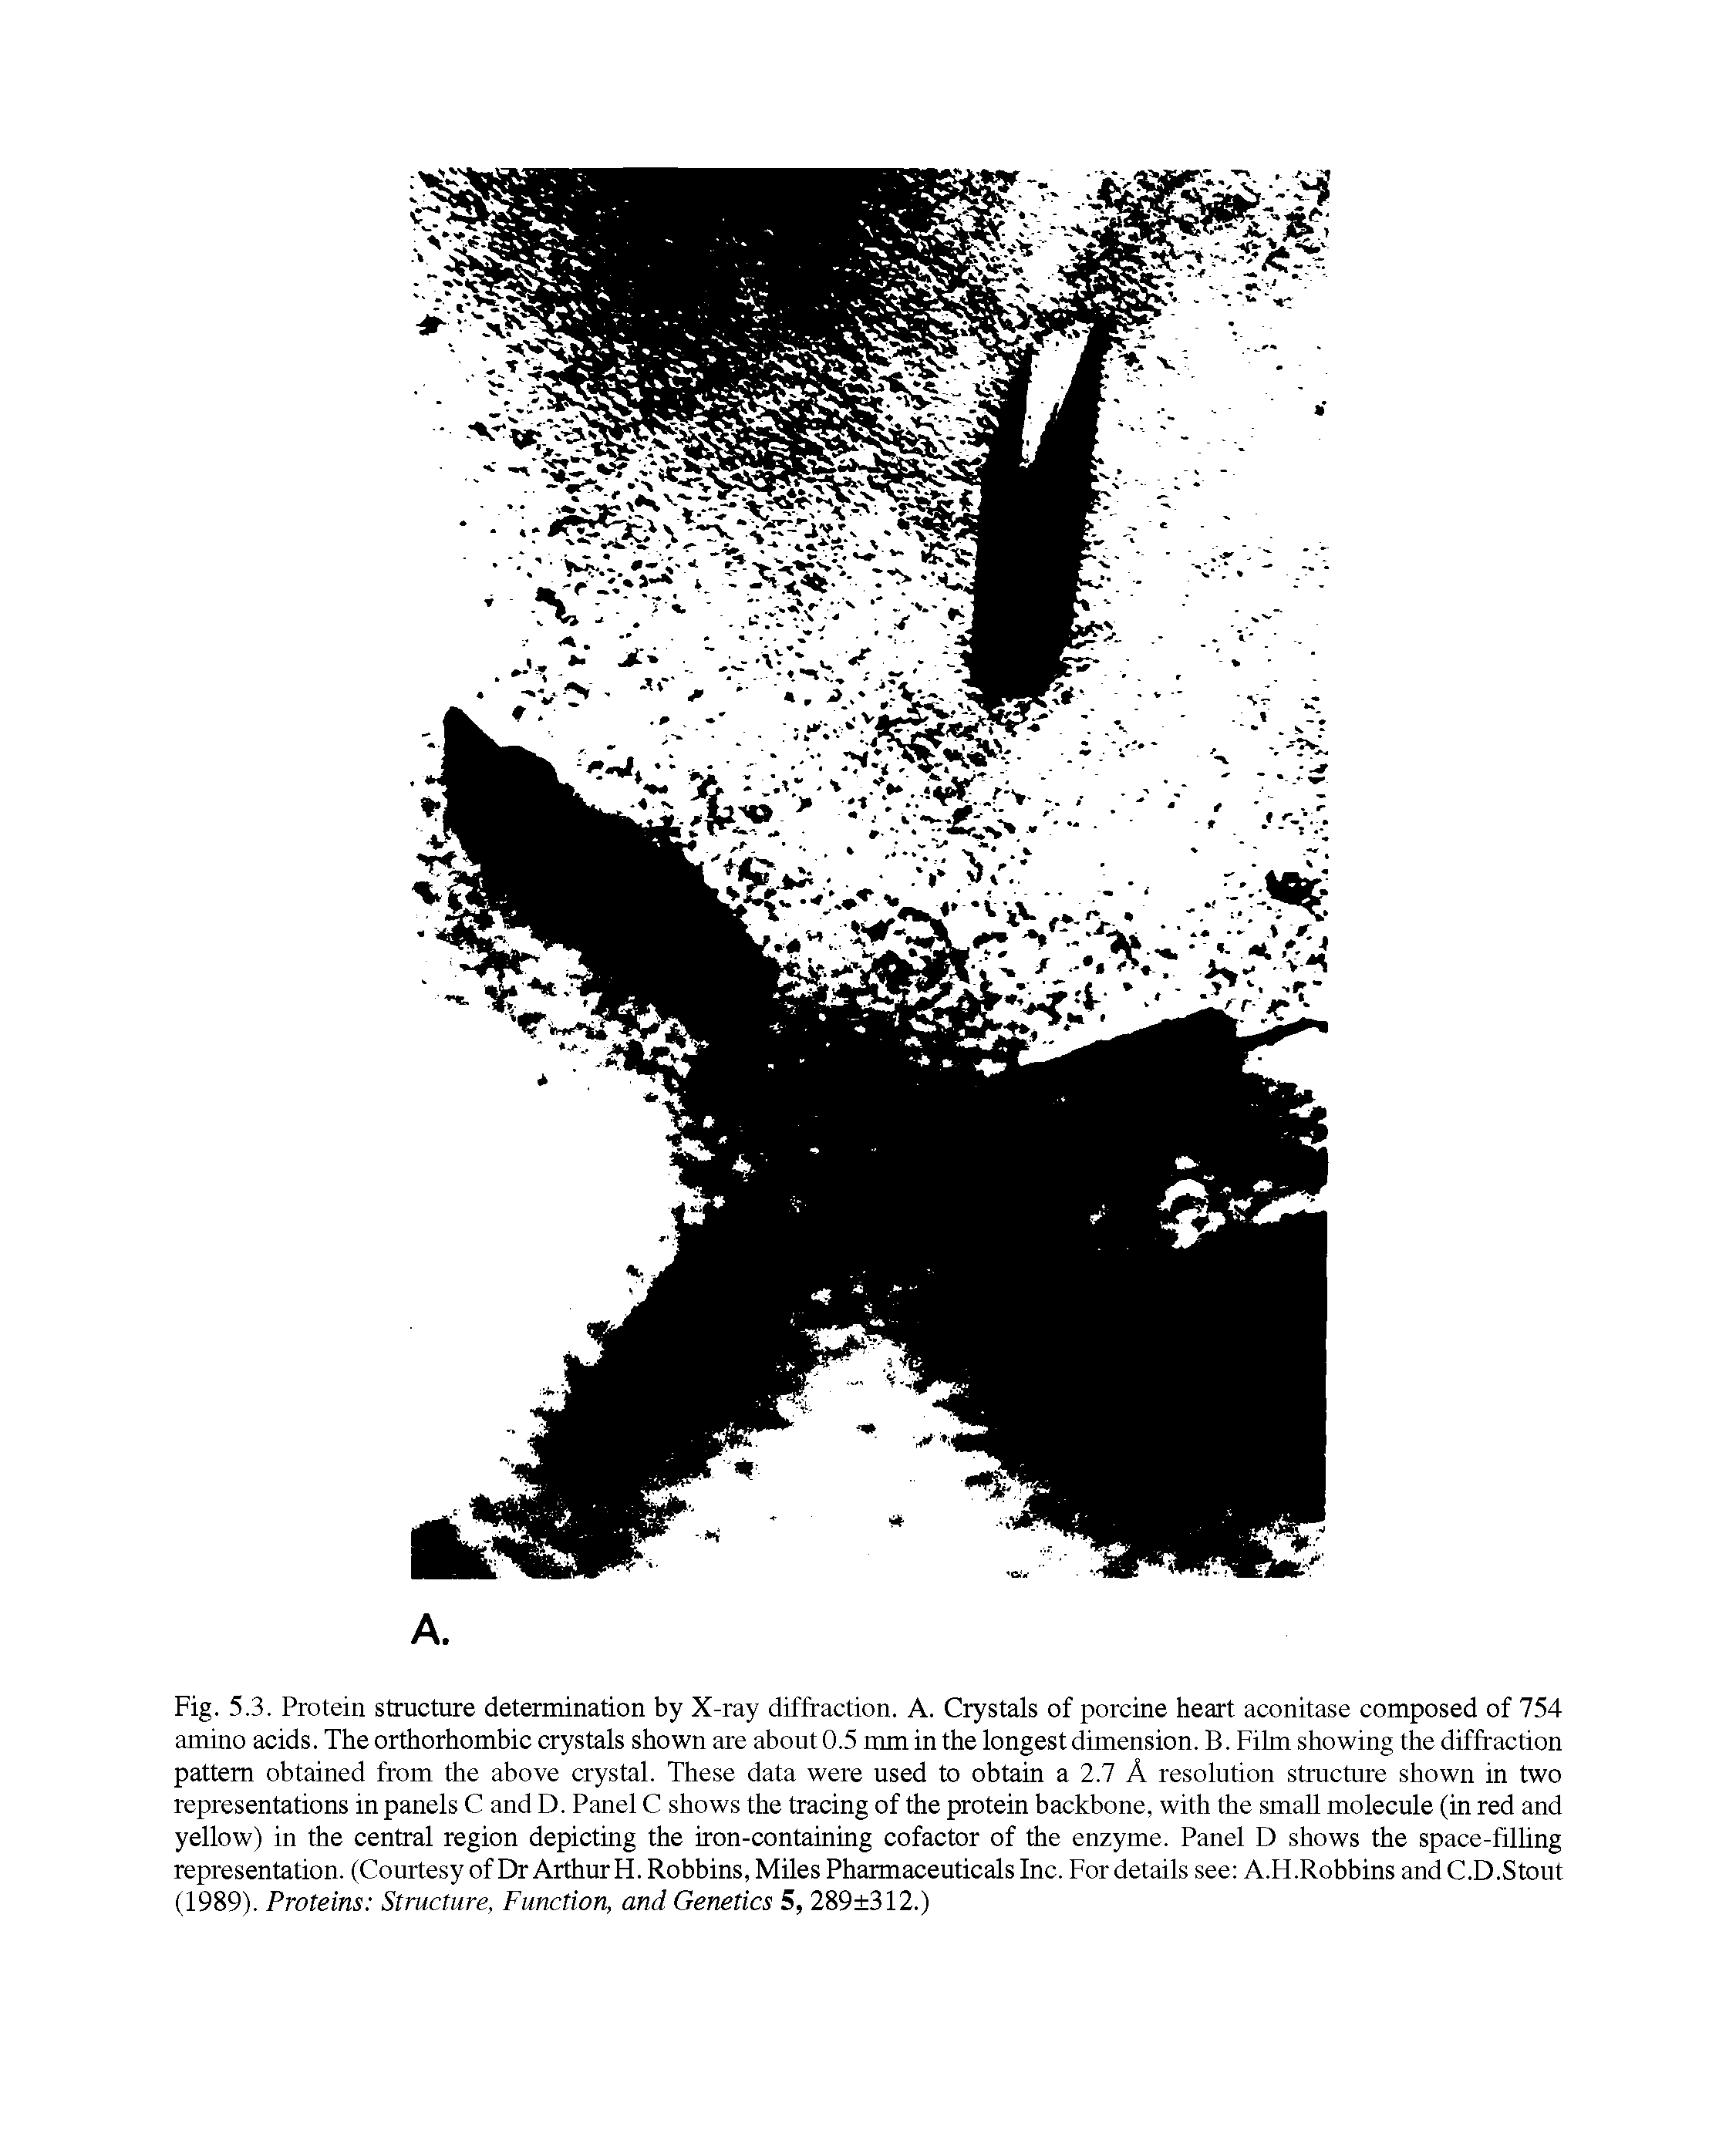 Fig. 5.3. Protein structure determination by X-ray diffraction. A. Crystals of porcine heart aconitase composed of 754 amino acids. The orthorhombic crystals shown are about 0.5 mm in the longest dimension. B. Film showing the diffraction pattern obtained from the above crystal. These data were used to obtain a 2.7 A resolution structure shown in two representations in panels C and D. Panel C shows the tracing of the protein backbone, with the small molecule (in red and yellow) in the central region depicting the iron-containing cofactor of the enzyme. Panel D shows the space-filling representation. (Courtesy of Dr Arthur H. Robbins, Miles Pharmaceuticals Inc. For details see A.H.Robbins and C.D.Stout (1989). Proteins Structure, Function, and Genetics 5, 289 312.)...